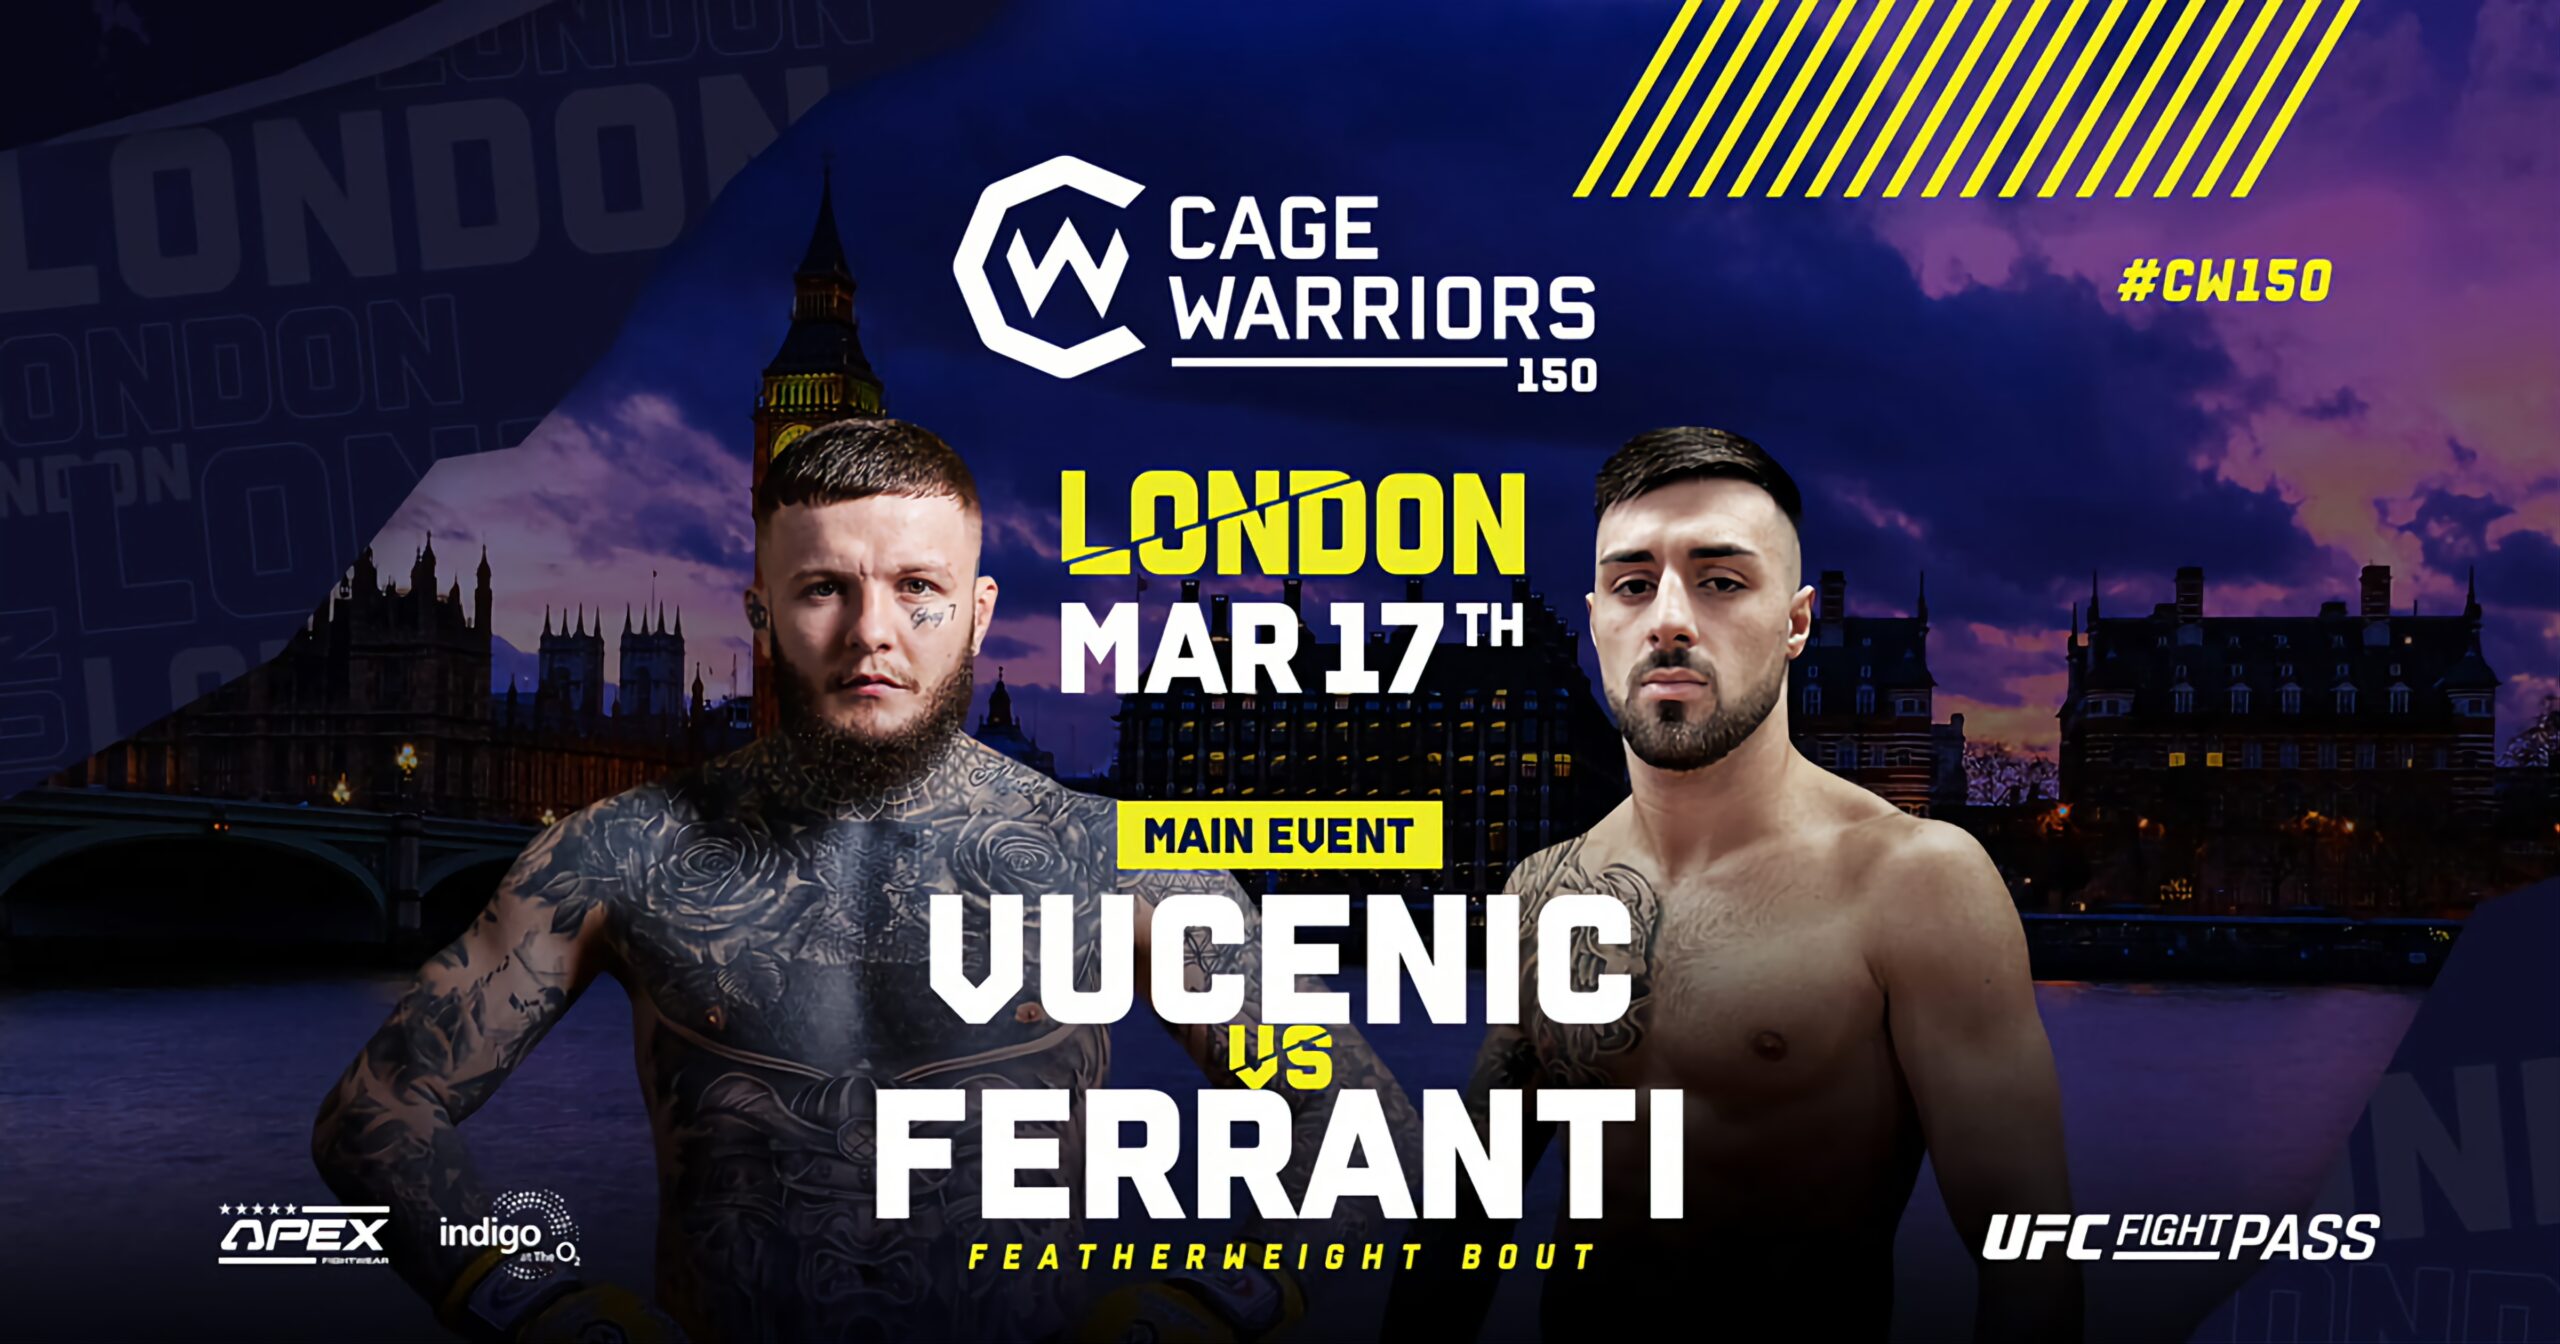 Cage Warriors 150 Live results MMA UK